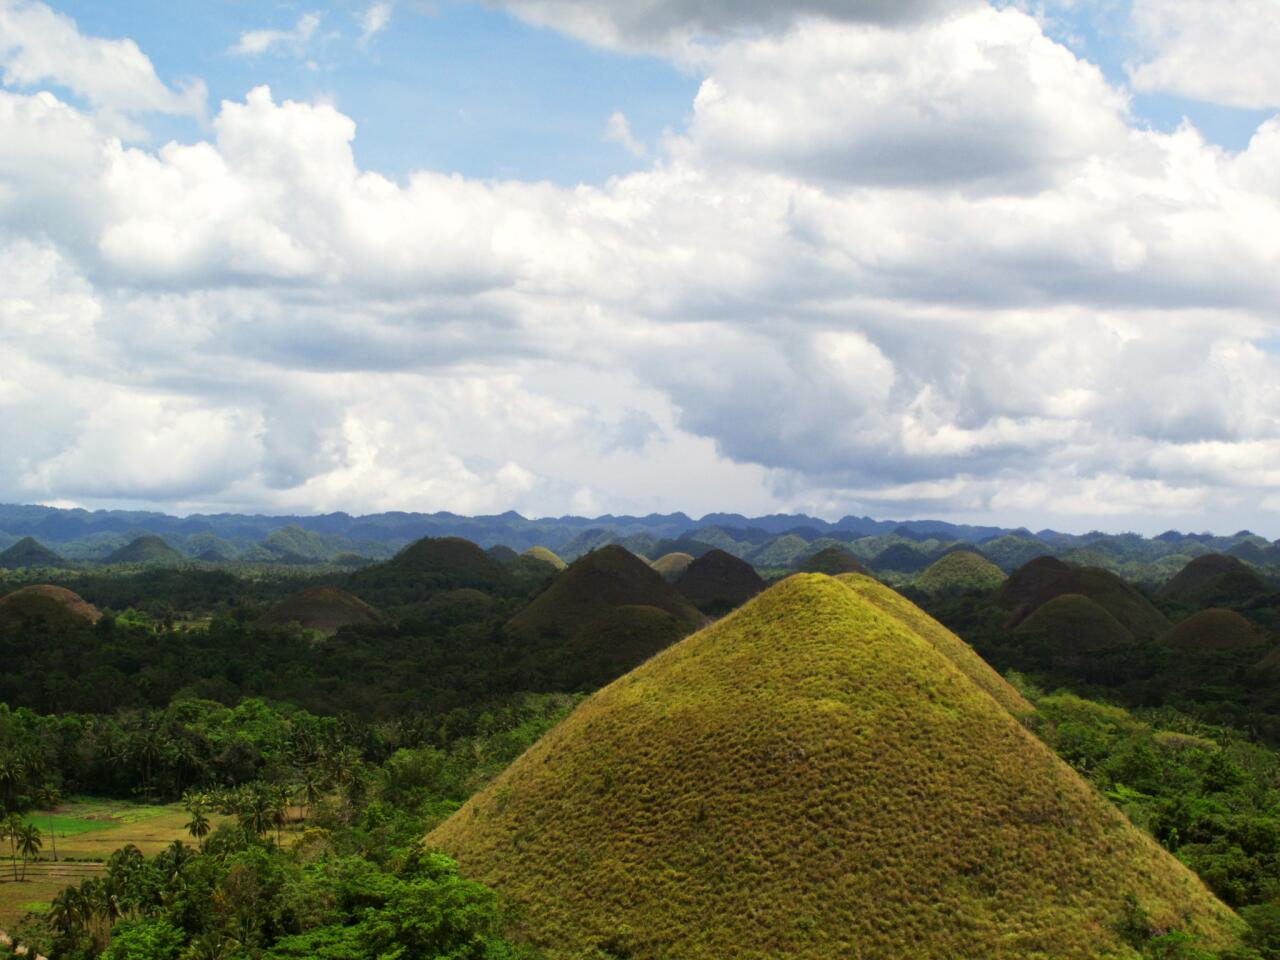 Unlike most destinations, the Chocolate Hills are best viewed when they're dried and brown. This is when the hills, located in Bohol Province, Philippines, start to earn their name. During the dry season, the normally green grass covering the cone-shaped mounds turns brown, creating fields of chocolate-colored hills. More photos...